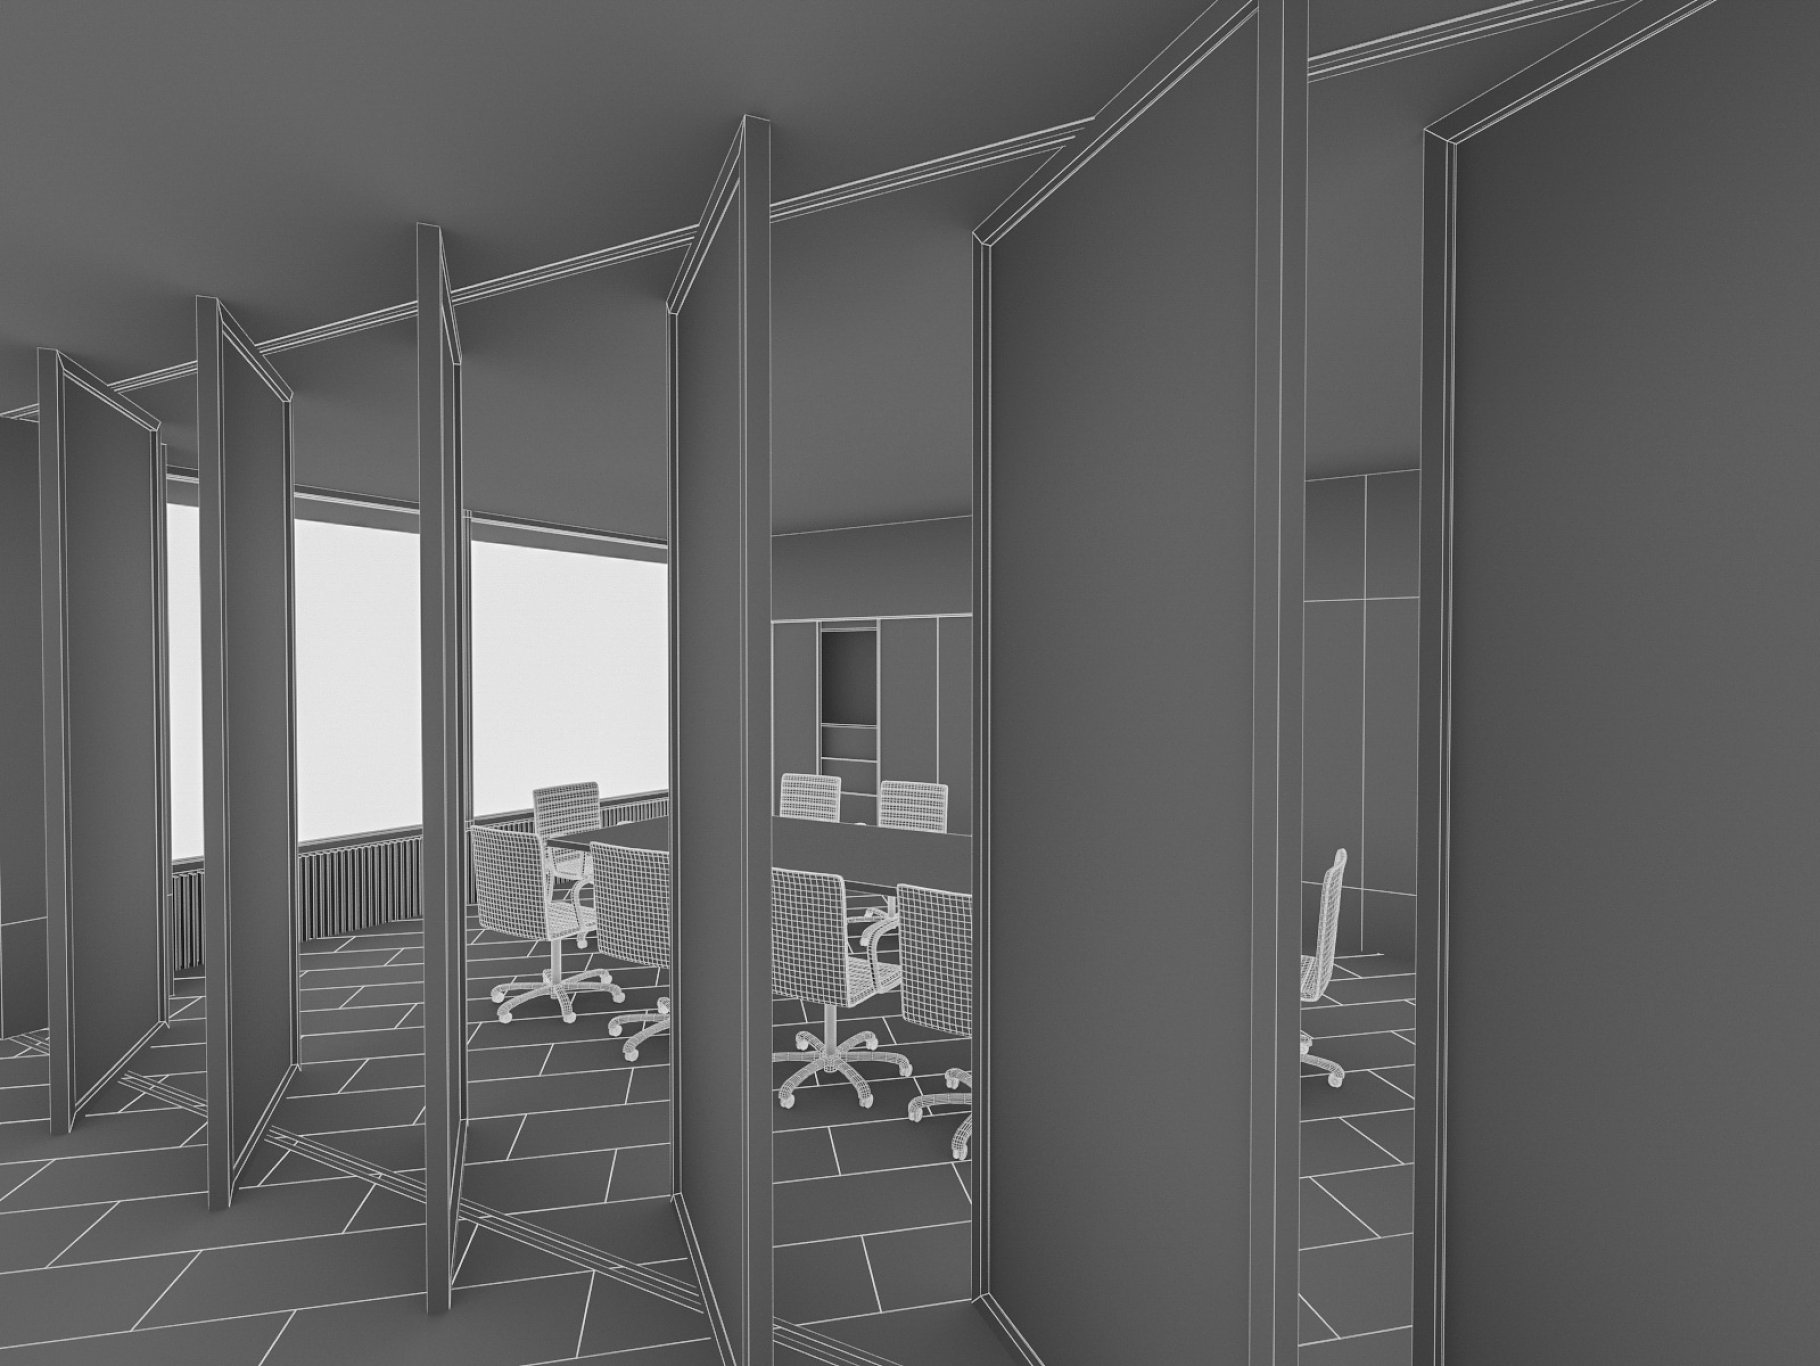 Rendering of an irresistible 3d model of an office interior without textures